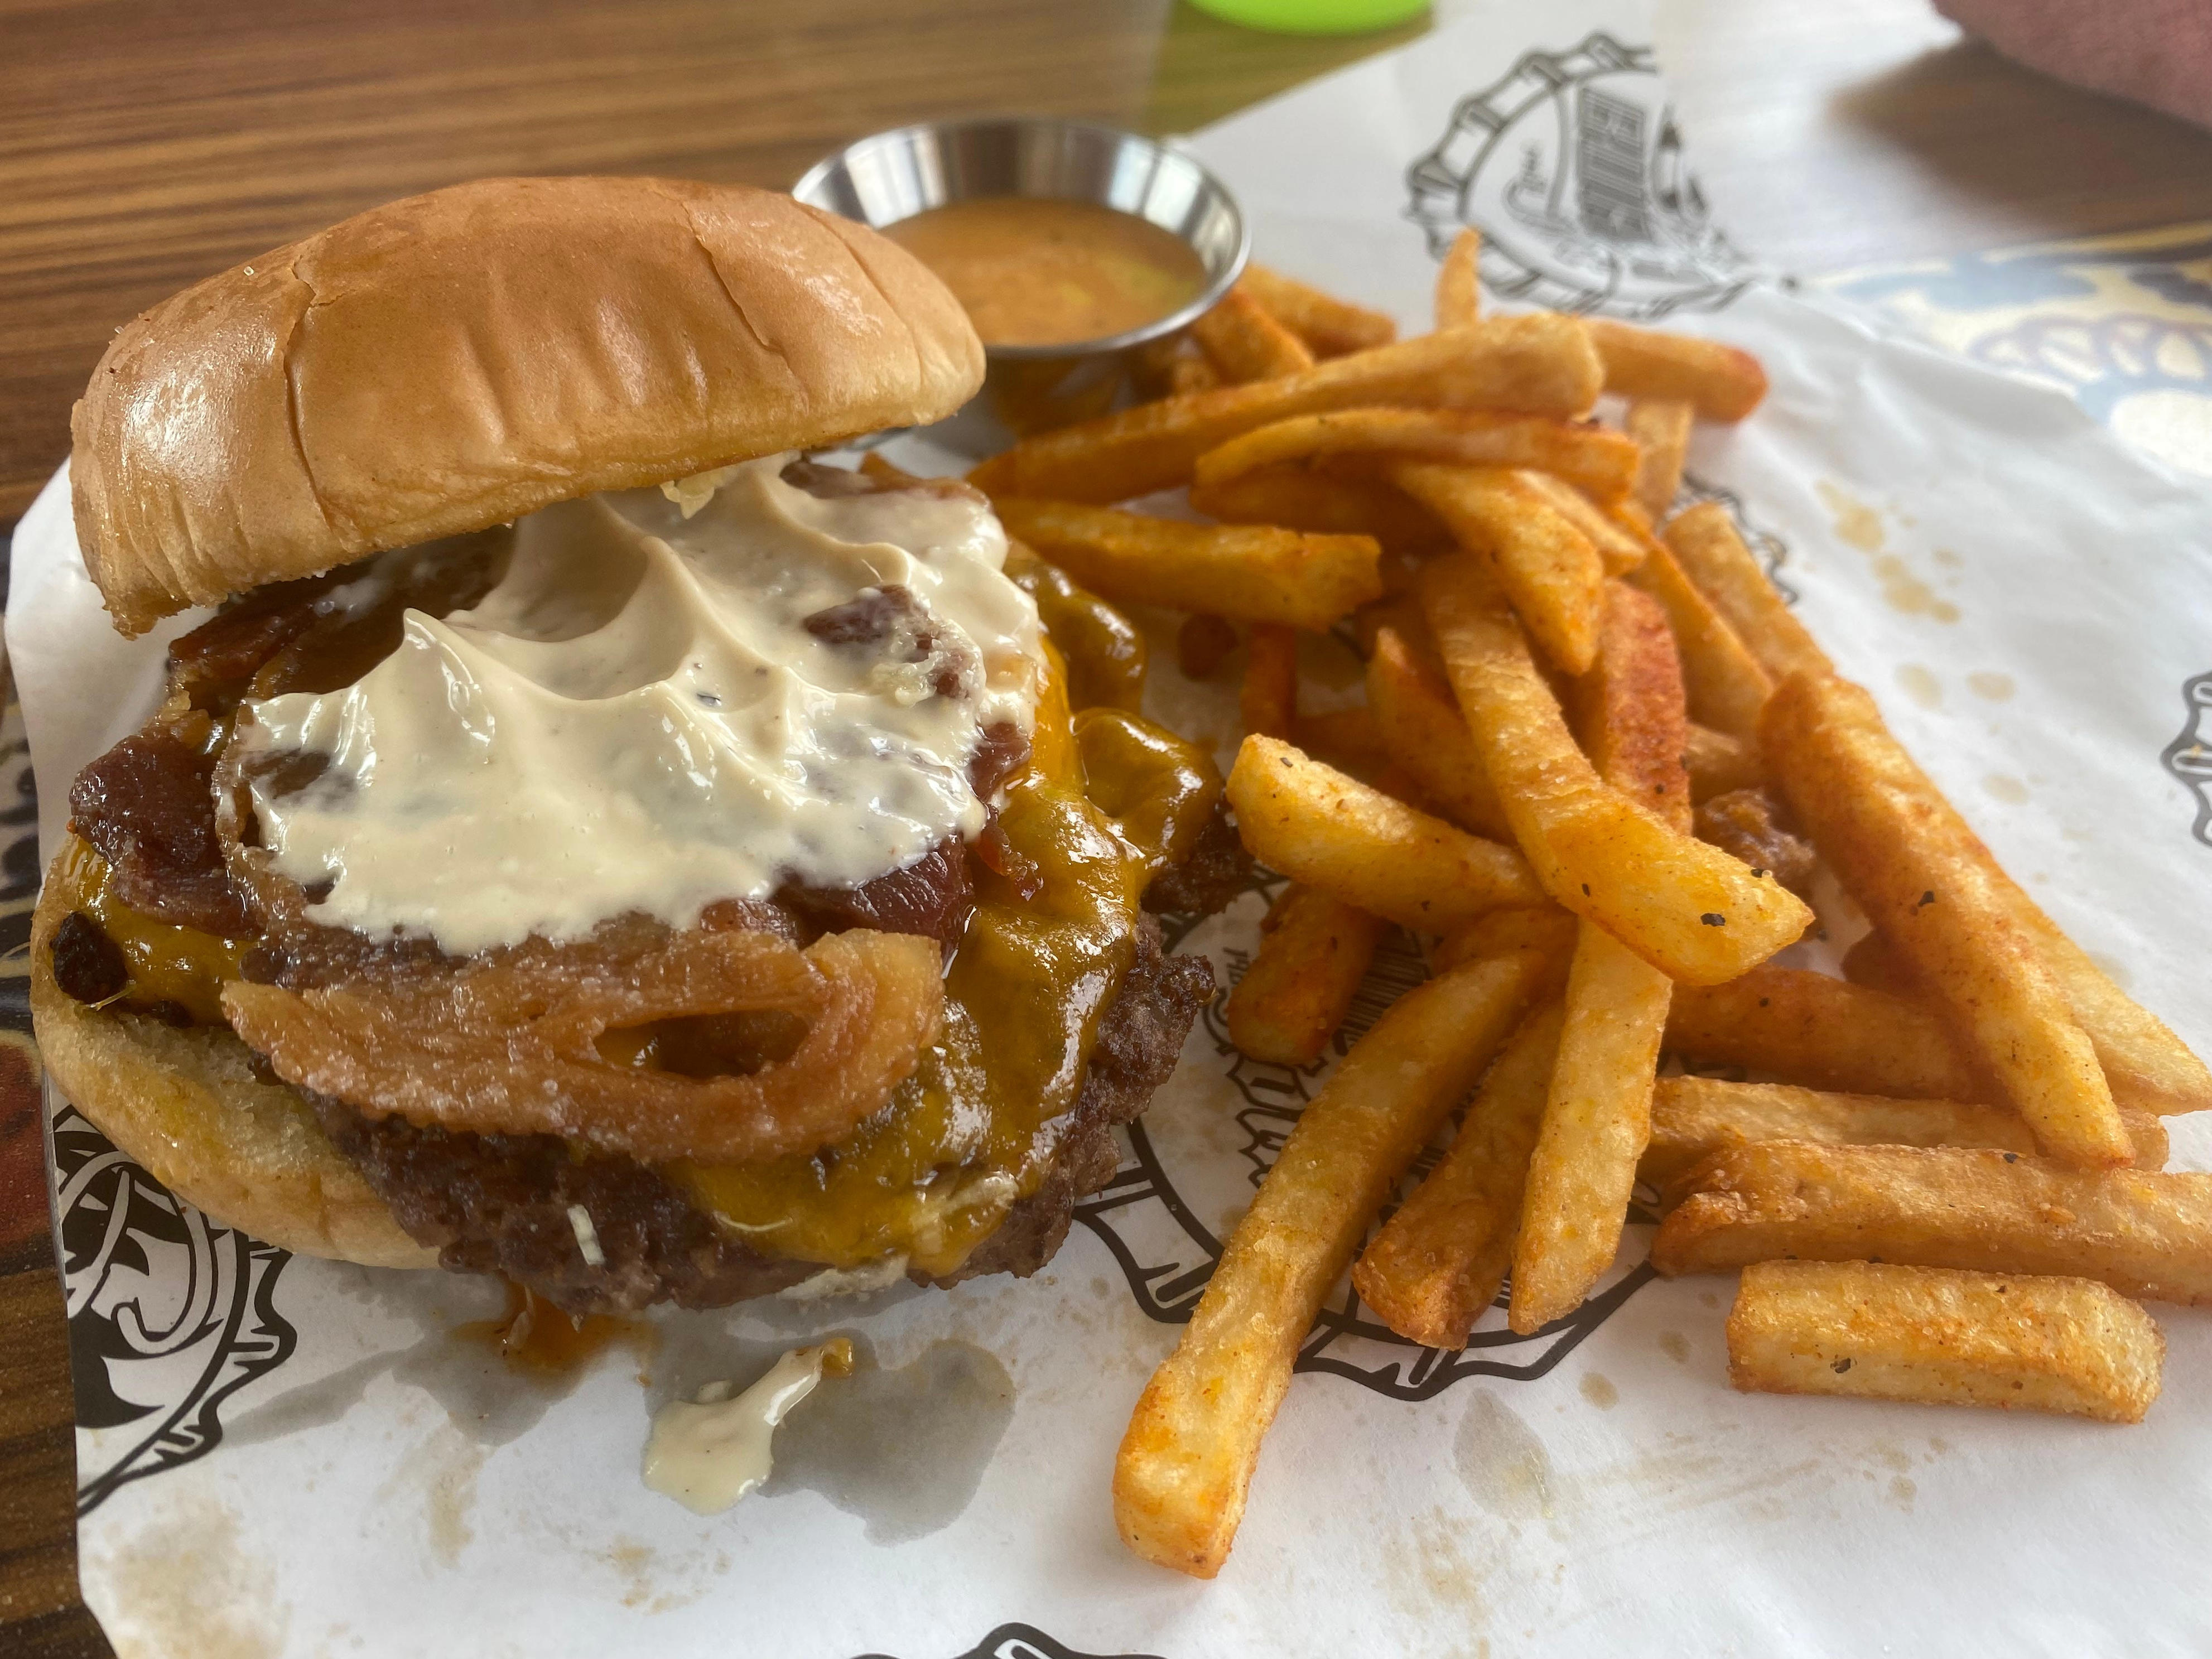 <p>Nothing goes better with burgers than hot fries, so I got some every time I ate at Guy's Burger Joint. </p><p>Even though the menu said the fries were hand-cut, they tasted more like <a href="https://www.businessinsider.com/chefs-share-how-to-make-frozen-french-fries-taste-better">frozen fries</a> — but that's completely fine by me. They stayed crisp for a long time. </p><p>They were tossed in a spice blend that tasted like a mix of salt, paprika, and possibly garlic powder. I tried to get the chef to share the recipe but had no luck.</p><p>Beyond tasting delicious on their own, the fries were a perfect vehicle to get more of my favorite chipotle-mayo sauce into my mouth.</p>